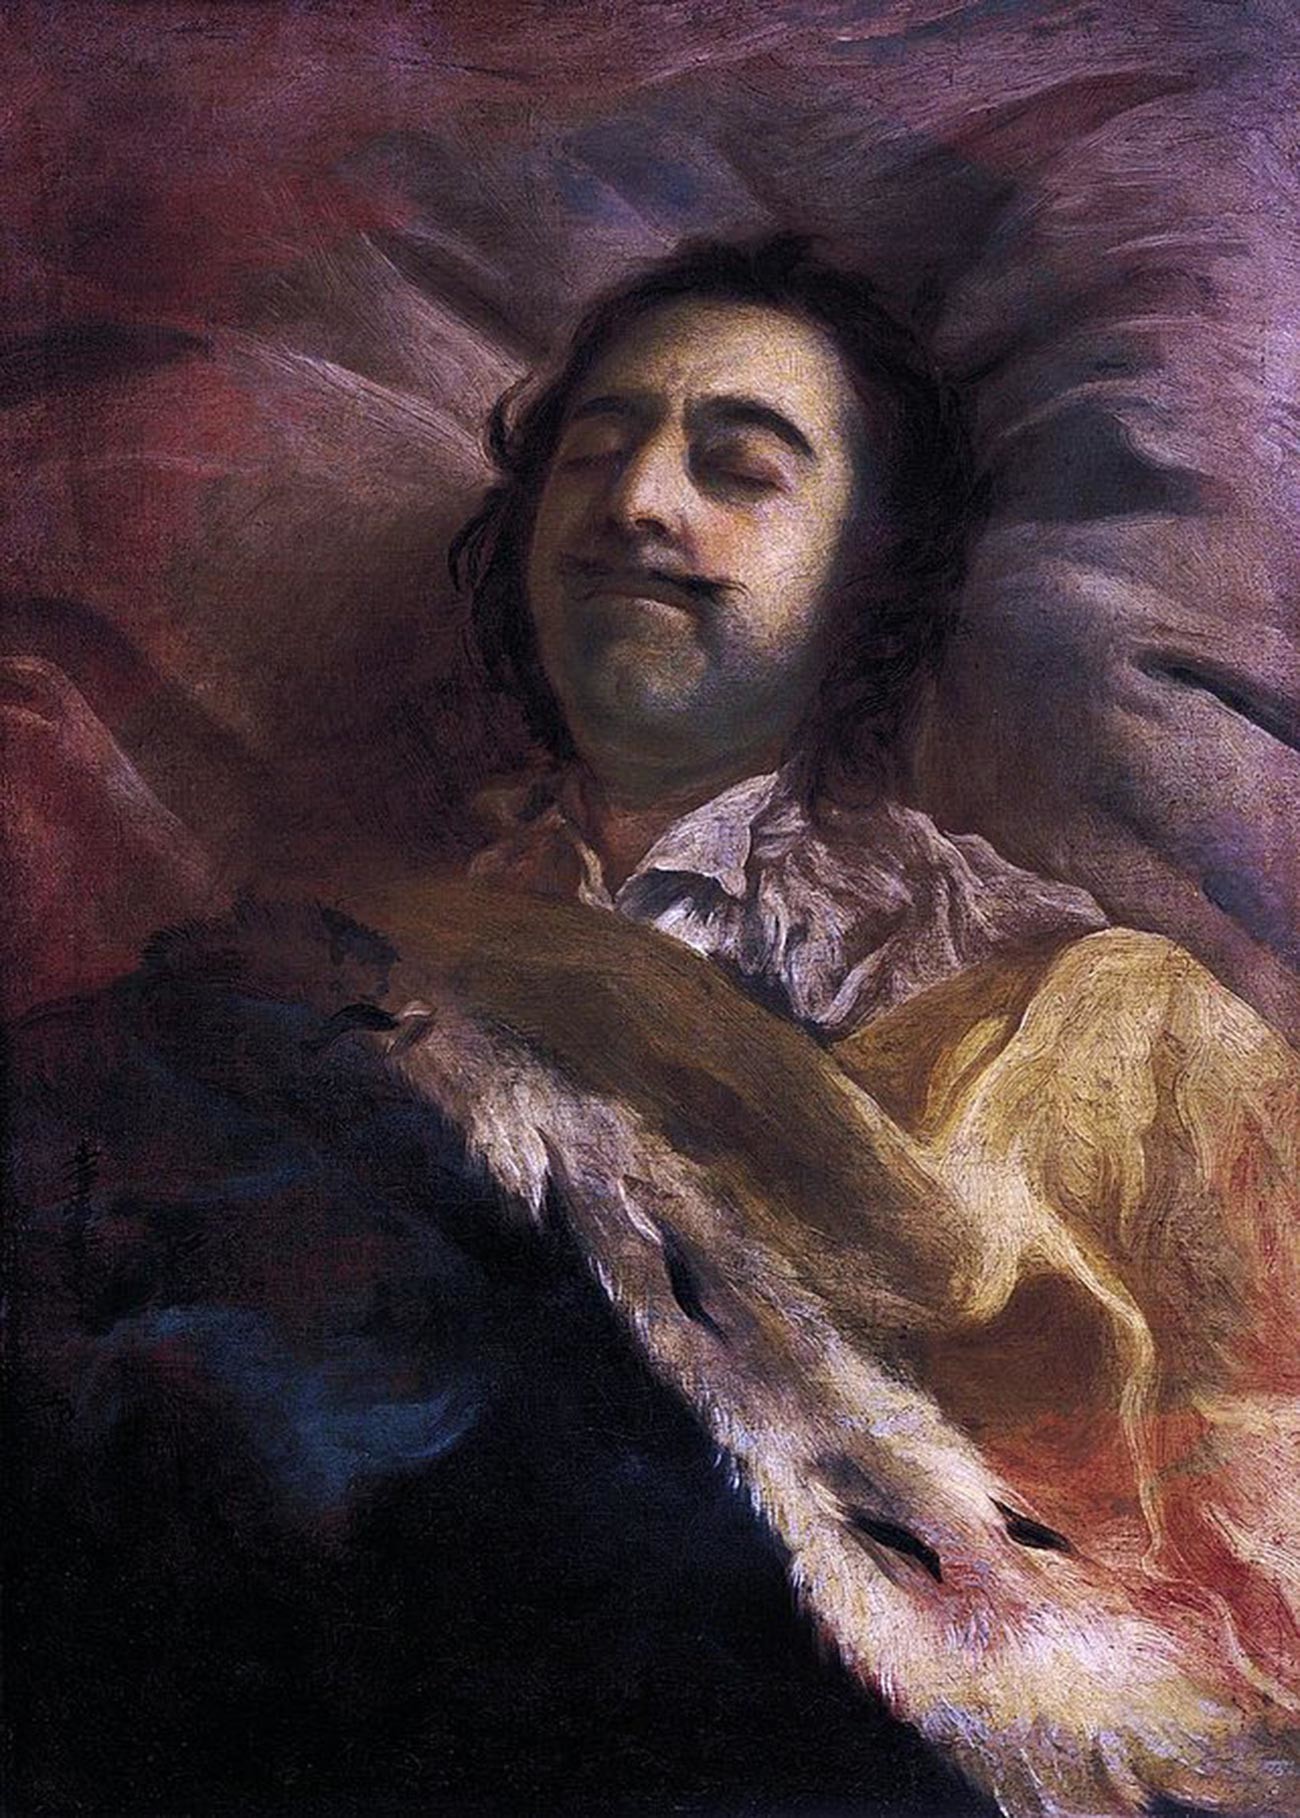 Peter the Great on his deathbed